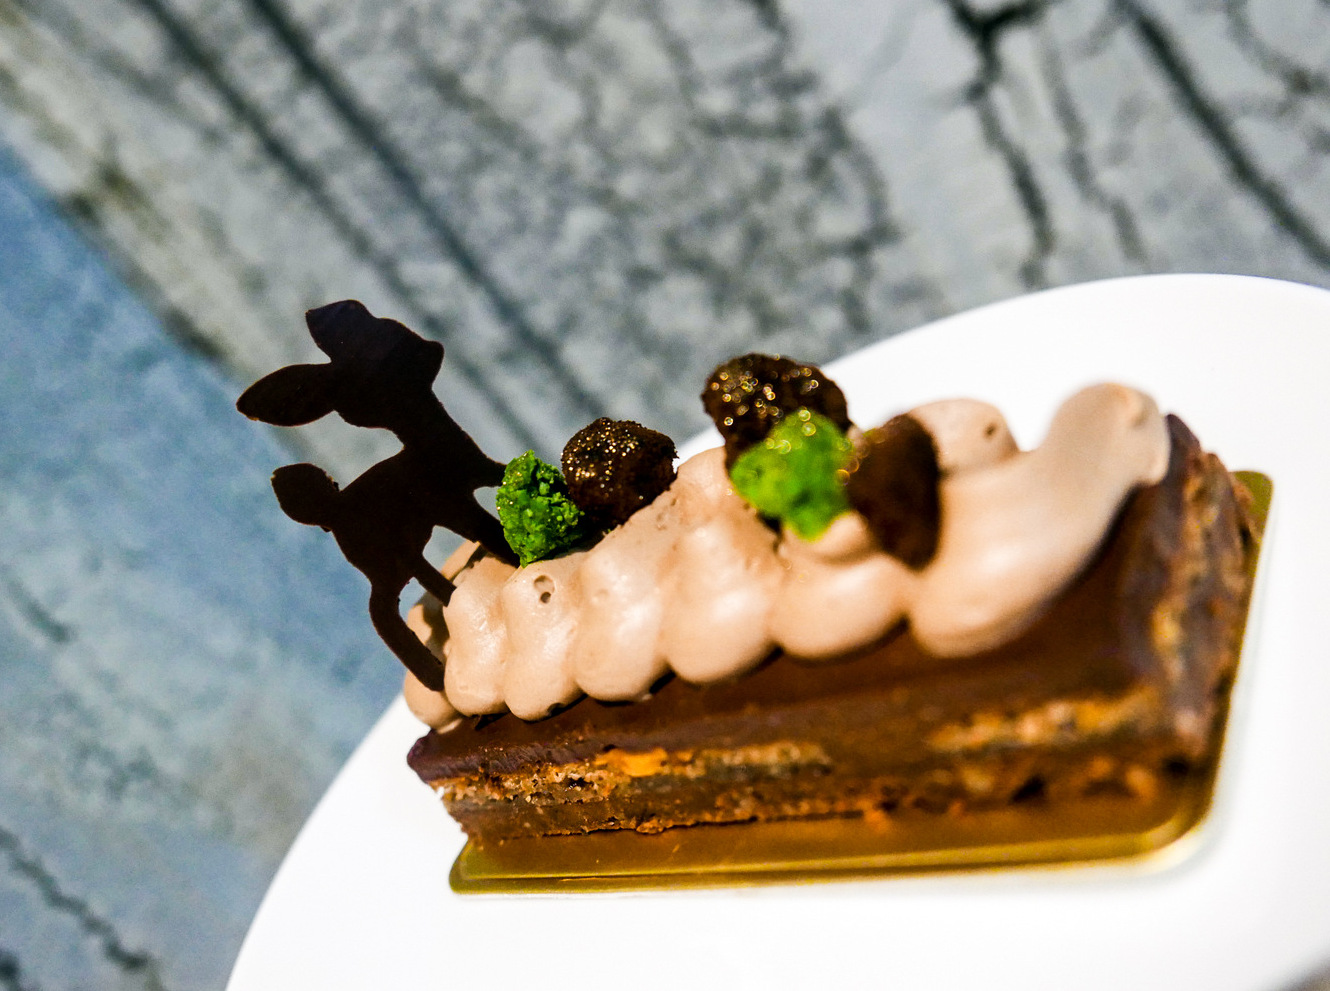 4. Xiao by Crustz - Le Cerf, hazelnut and chocolate